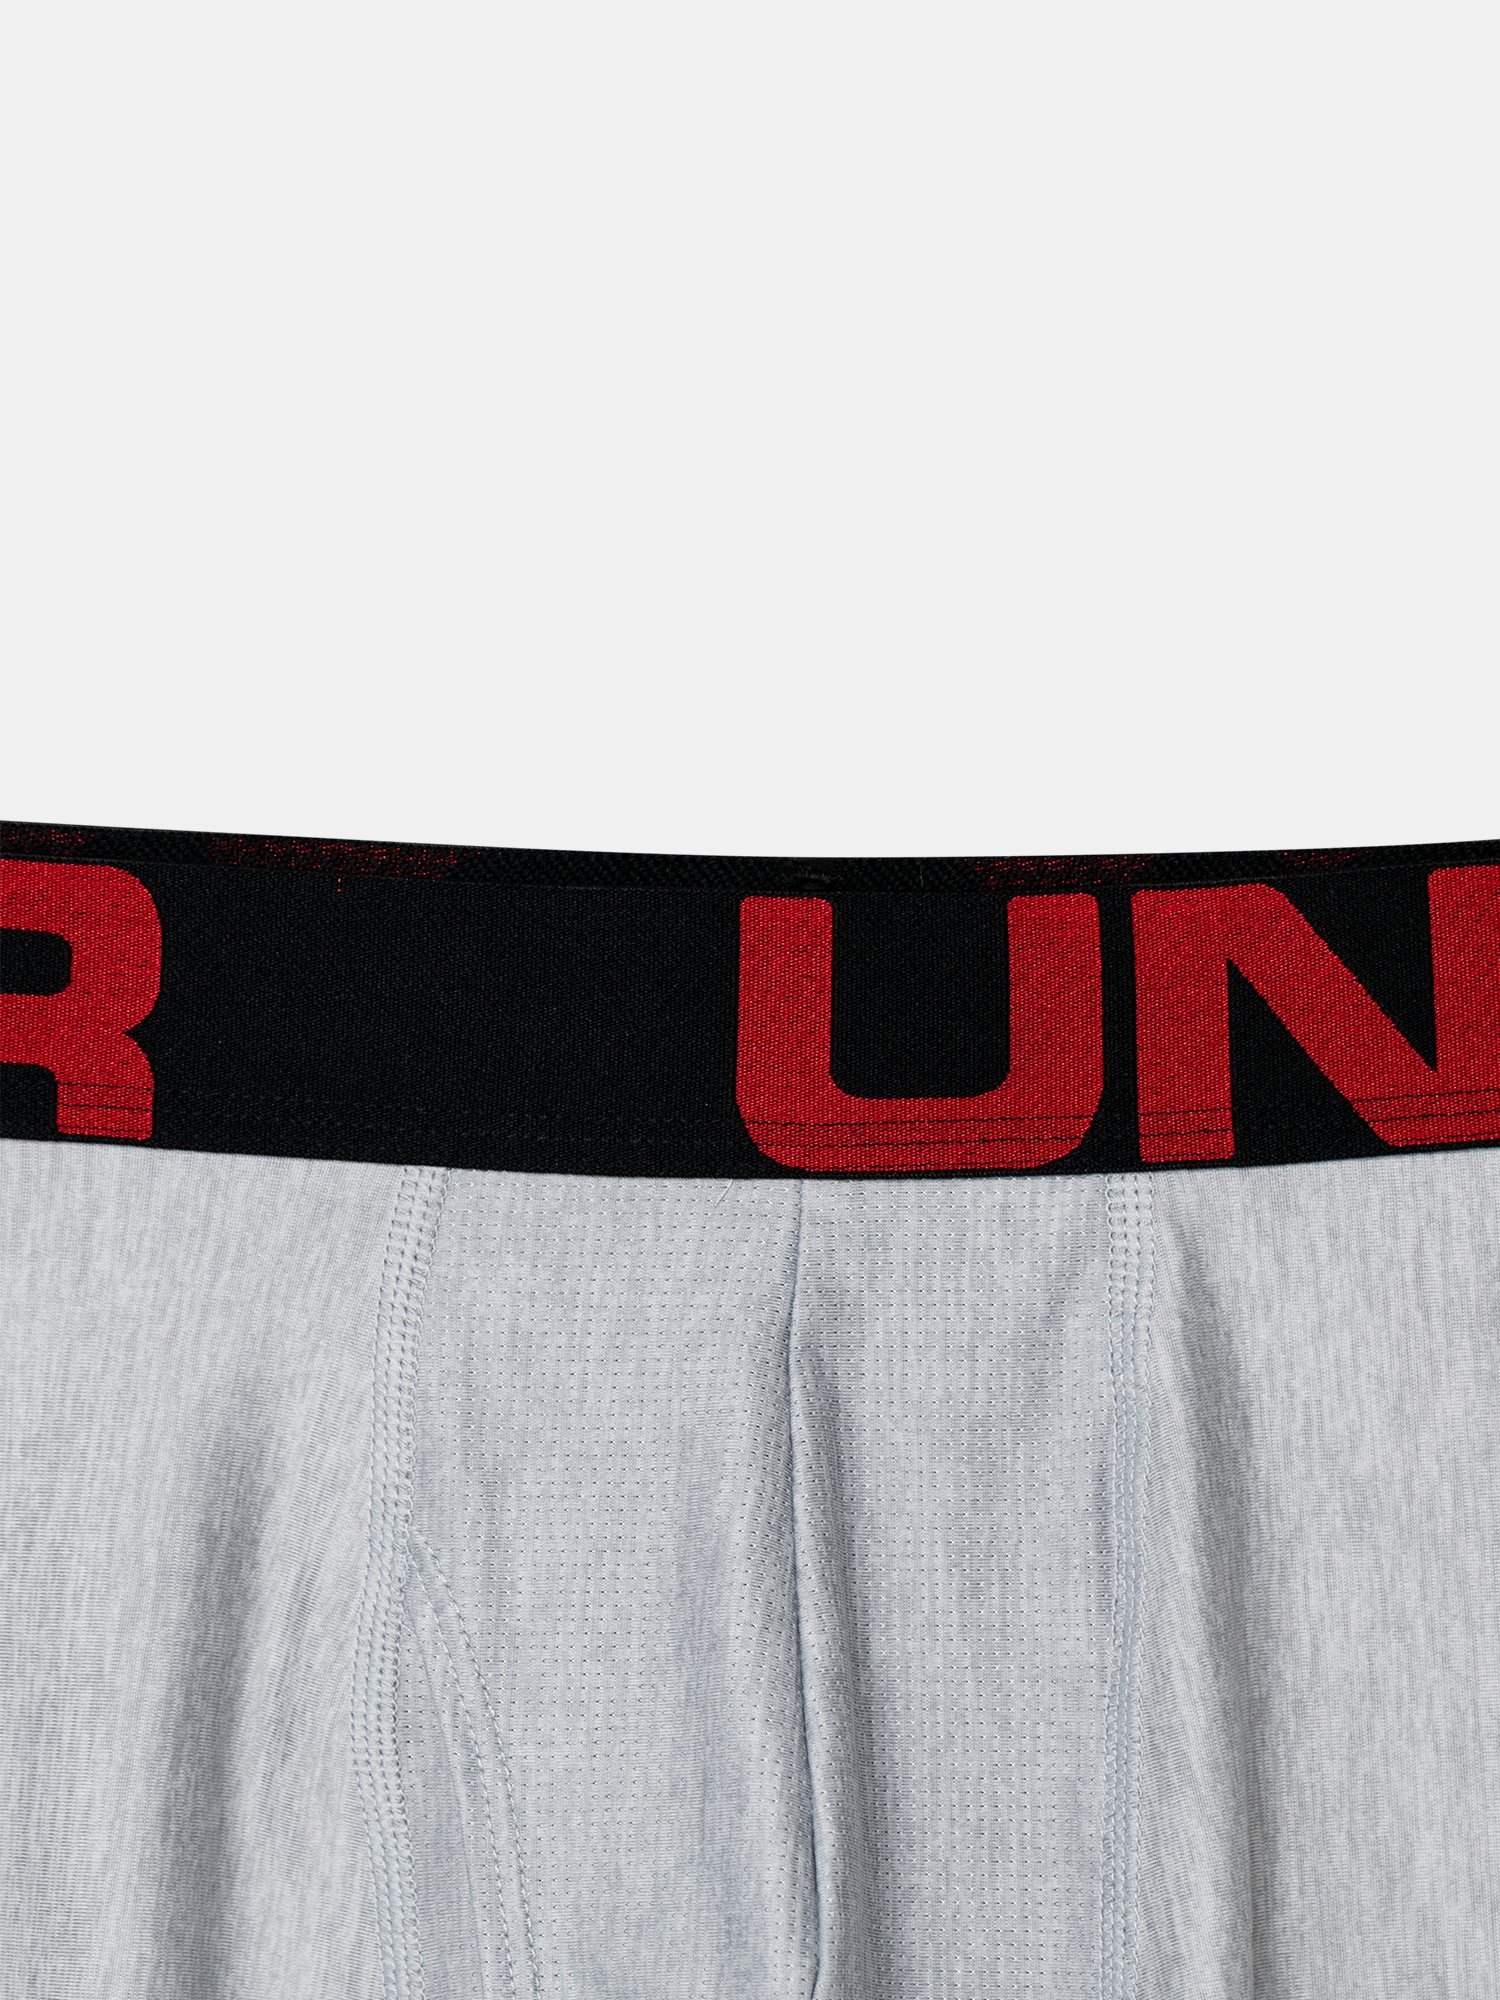 Boxerky Under Armour Tech 3in 2 Pack - sivá